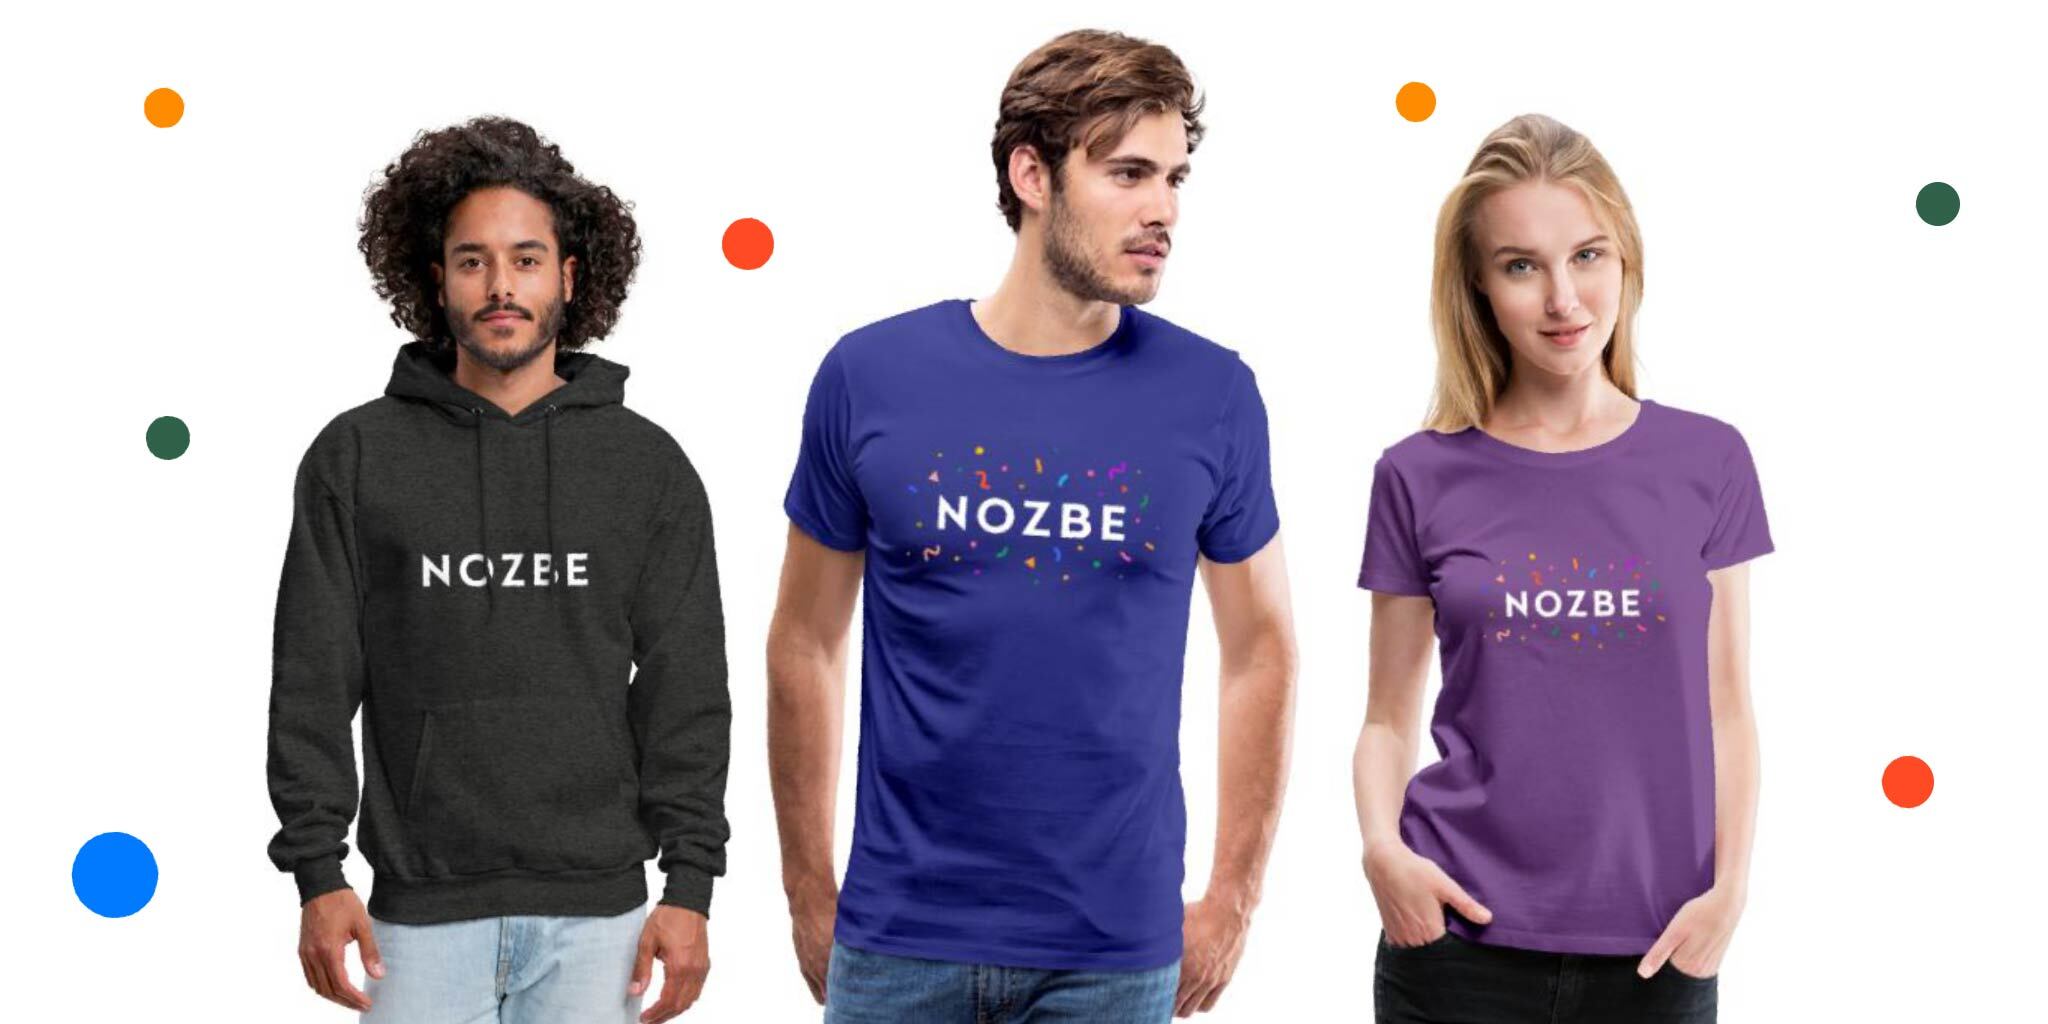 Nozbe Store - Get Cool Gadgets With Our Logo